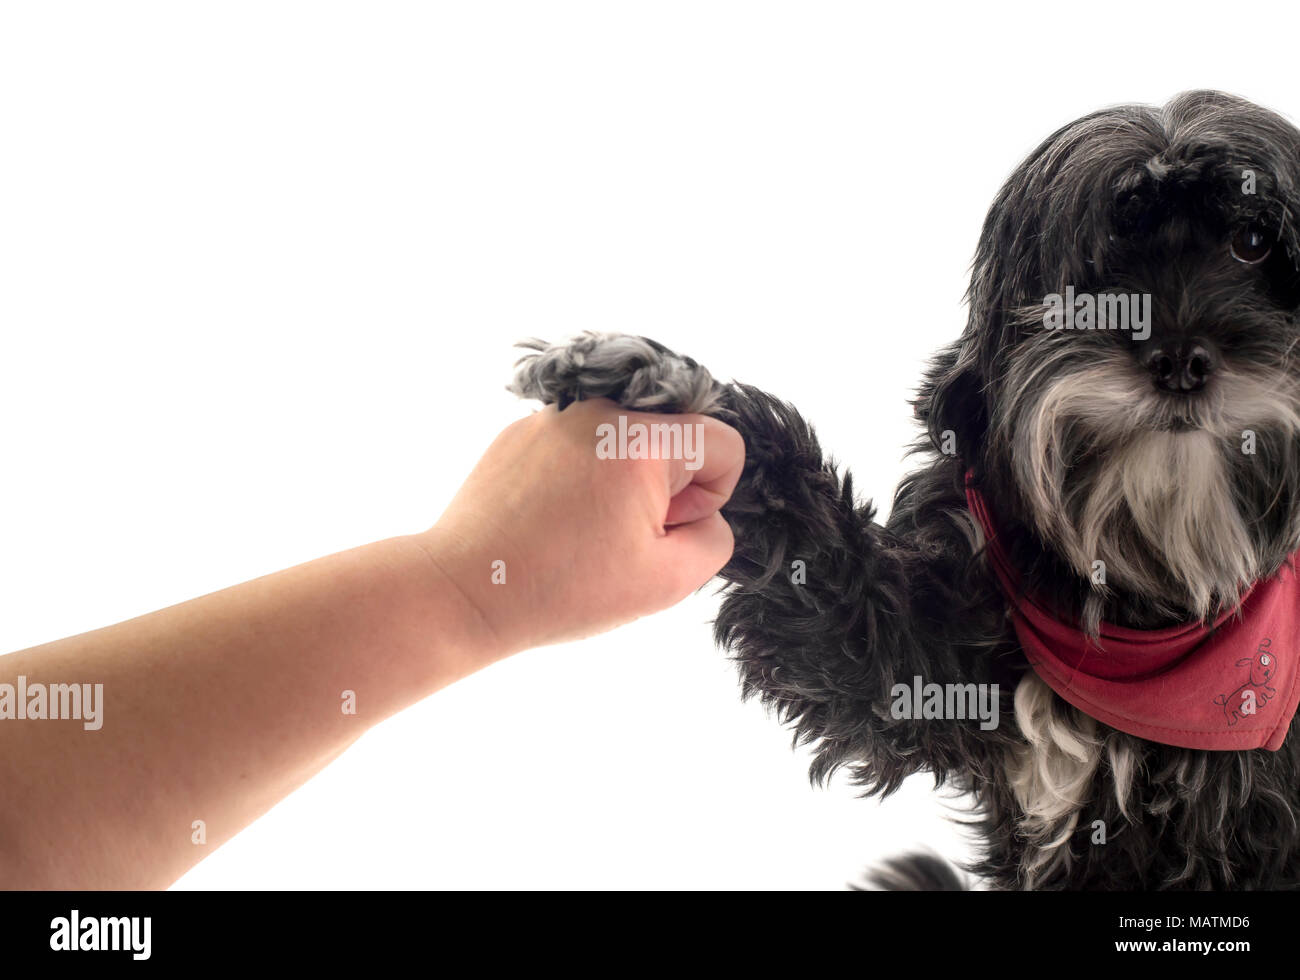 Black dog stops a human fist in front of white background Stock Photo